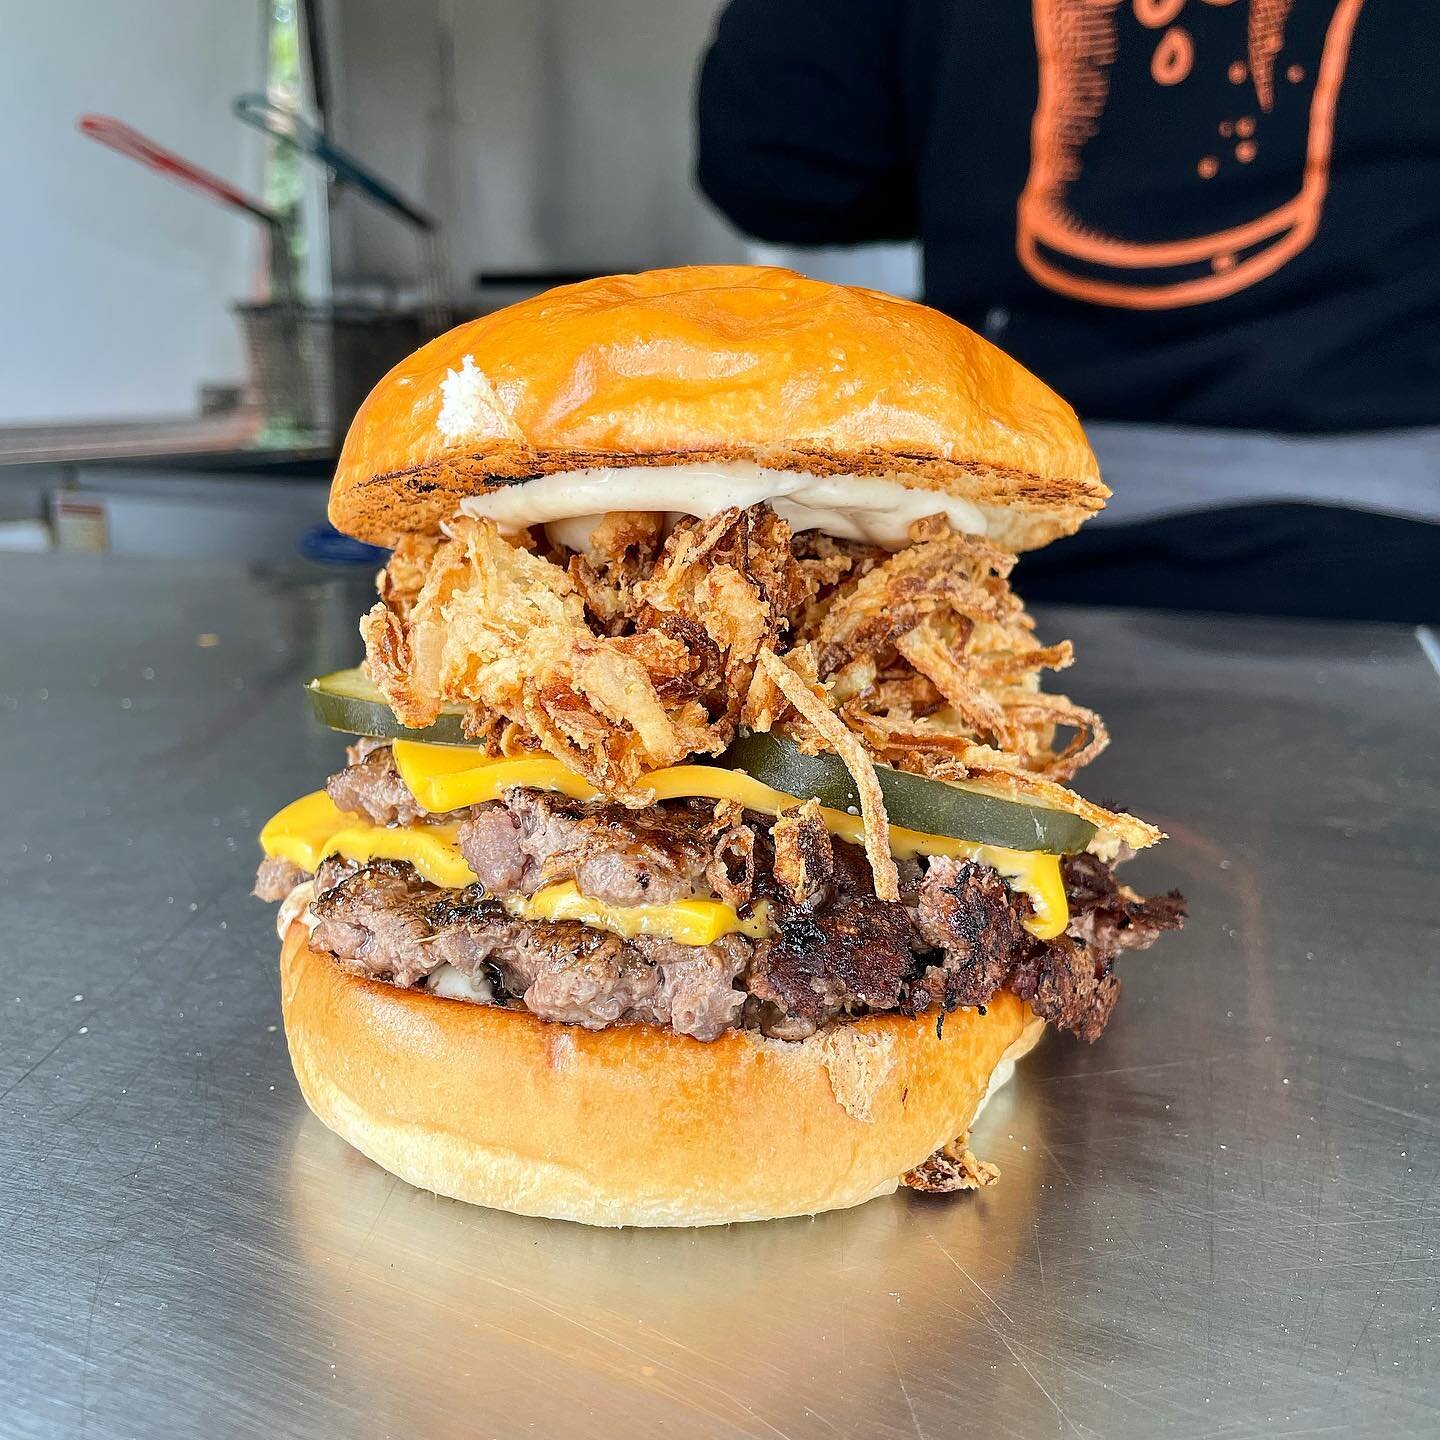 Speak easy this weekend with the Oklahoma fried onion burger 2.0. Topped with pepper aioli and stacked with shoe string fried onions!